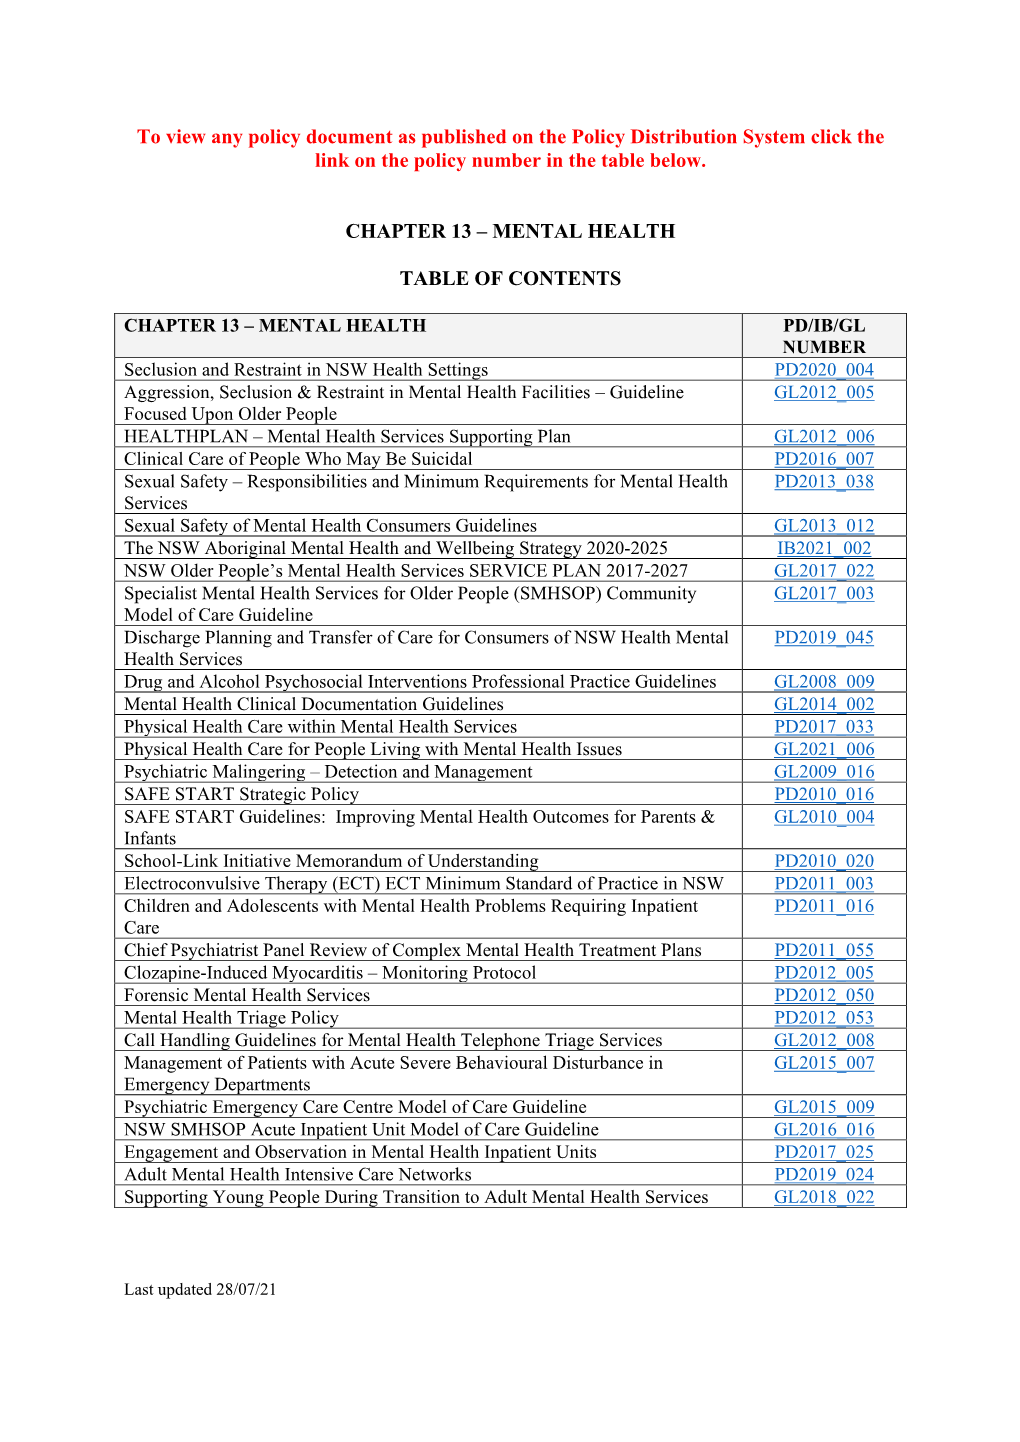 Chapter 13 – Mental Health Table of Contents